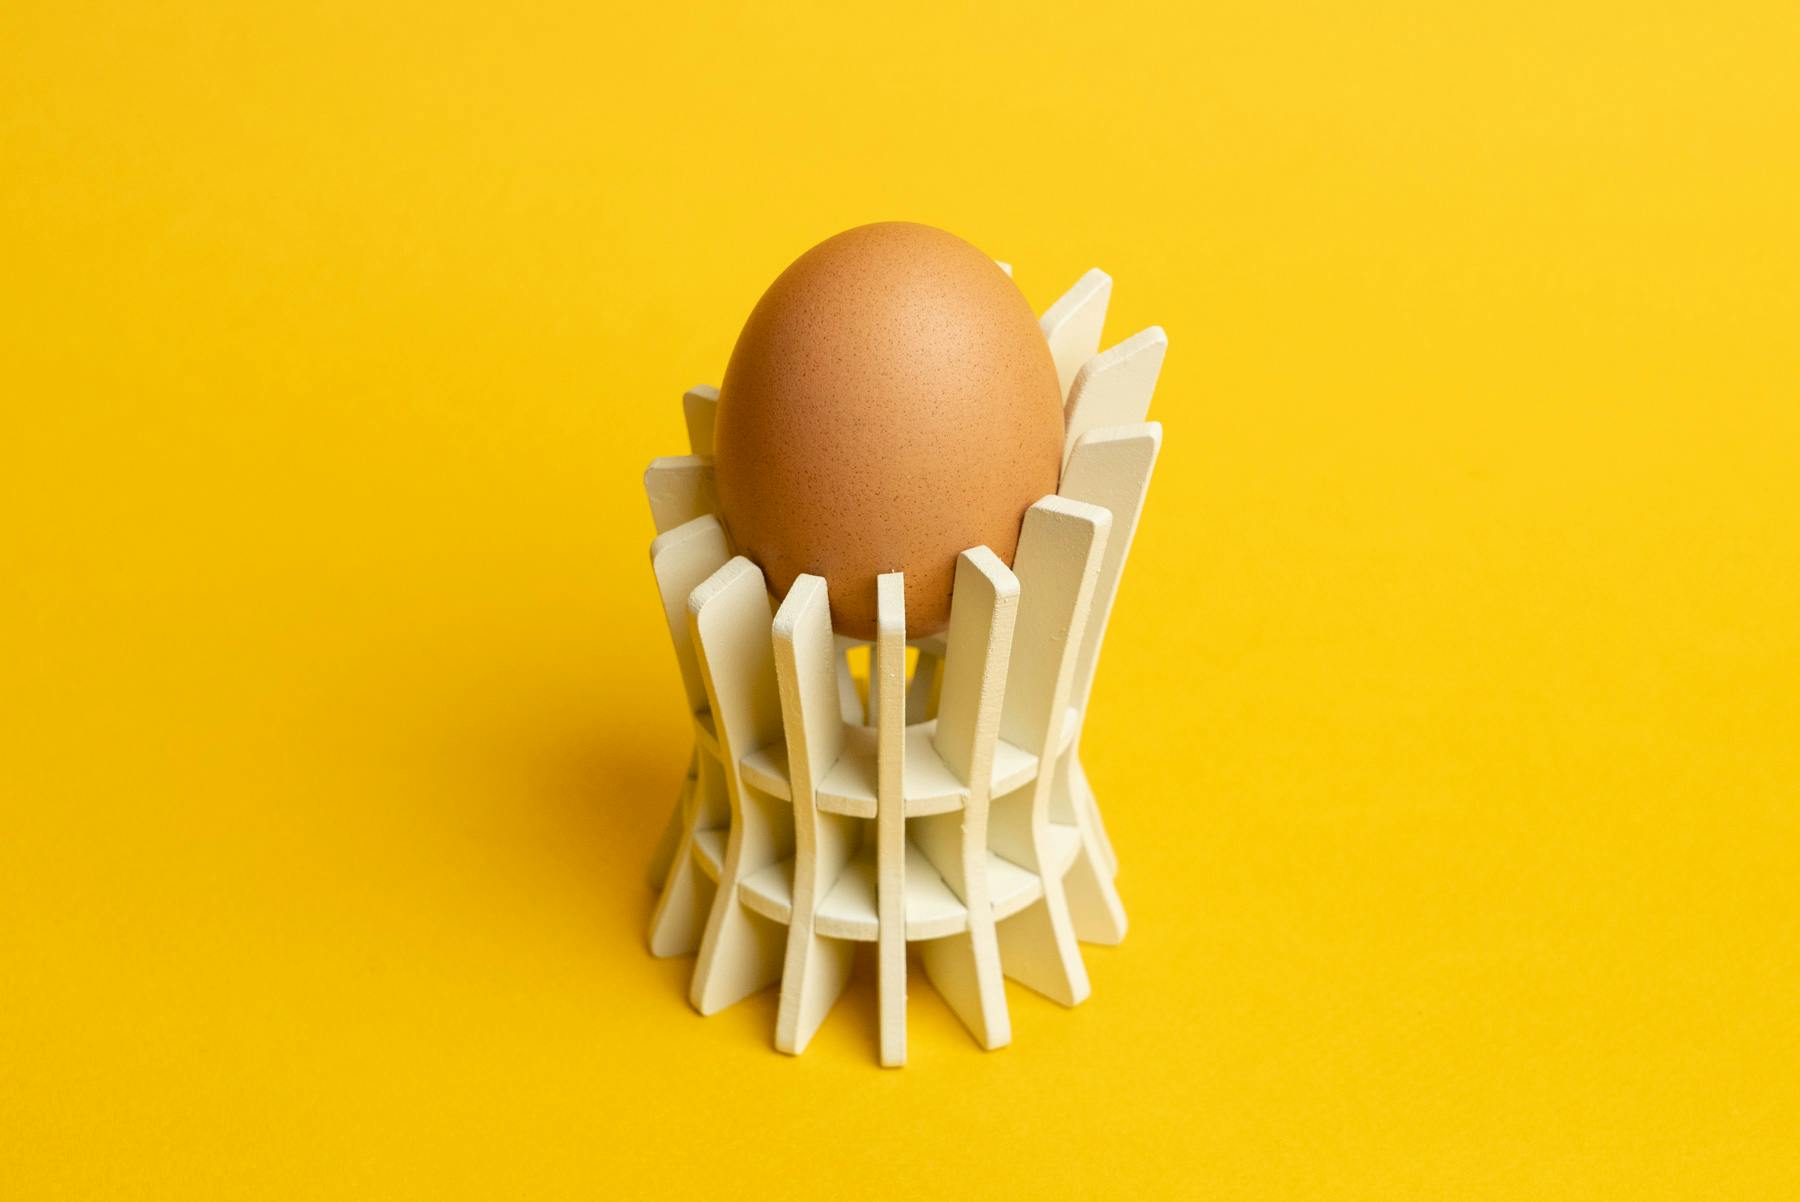 EggHolder 1, a white cylindrical fin loft model, holding up an egg against a bright yellow background.